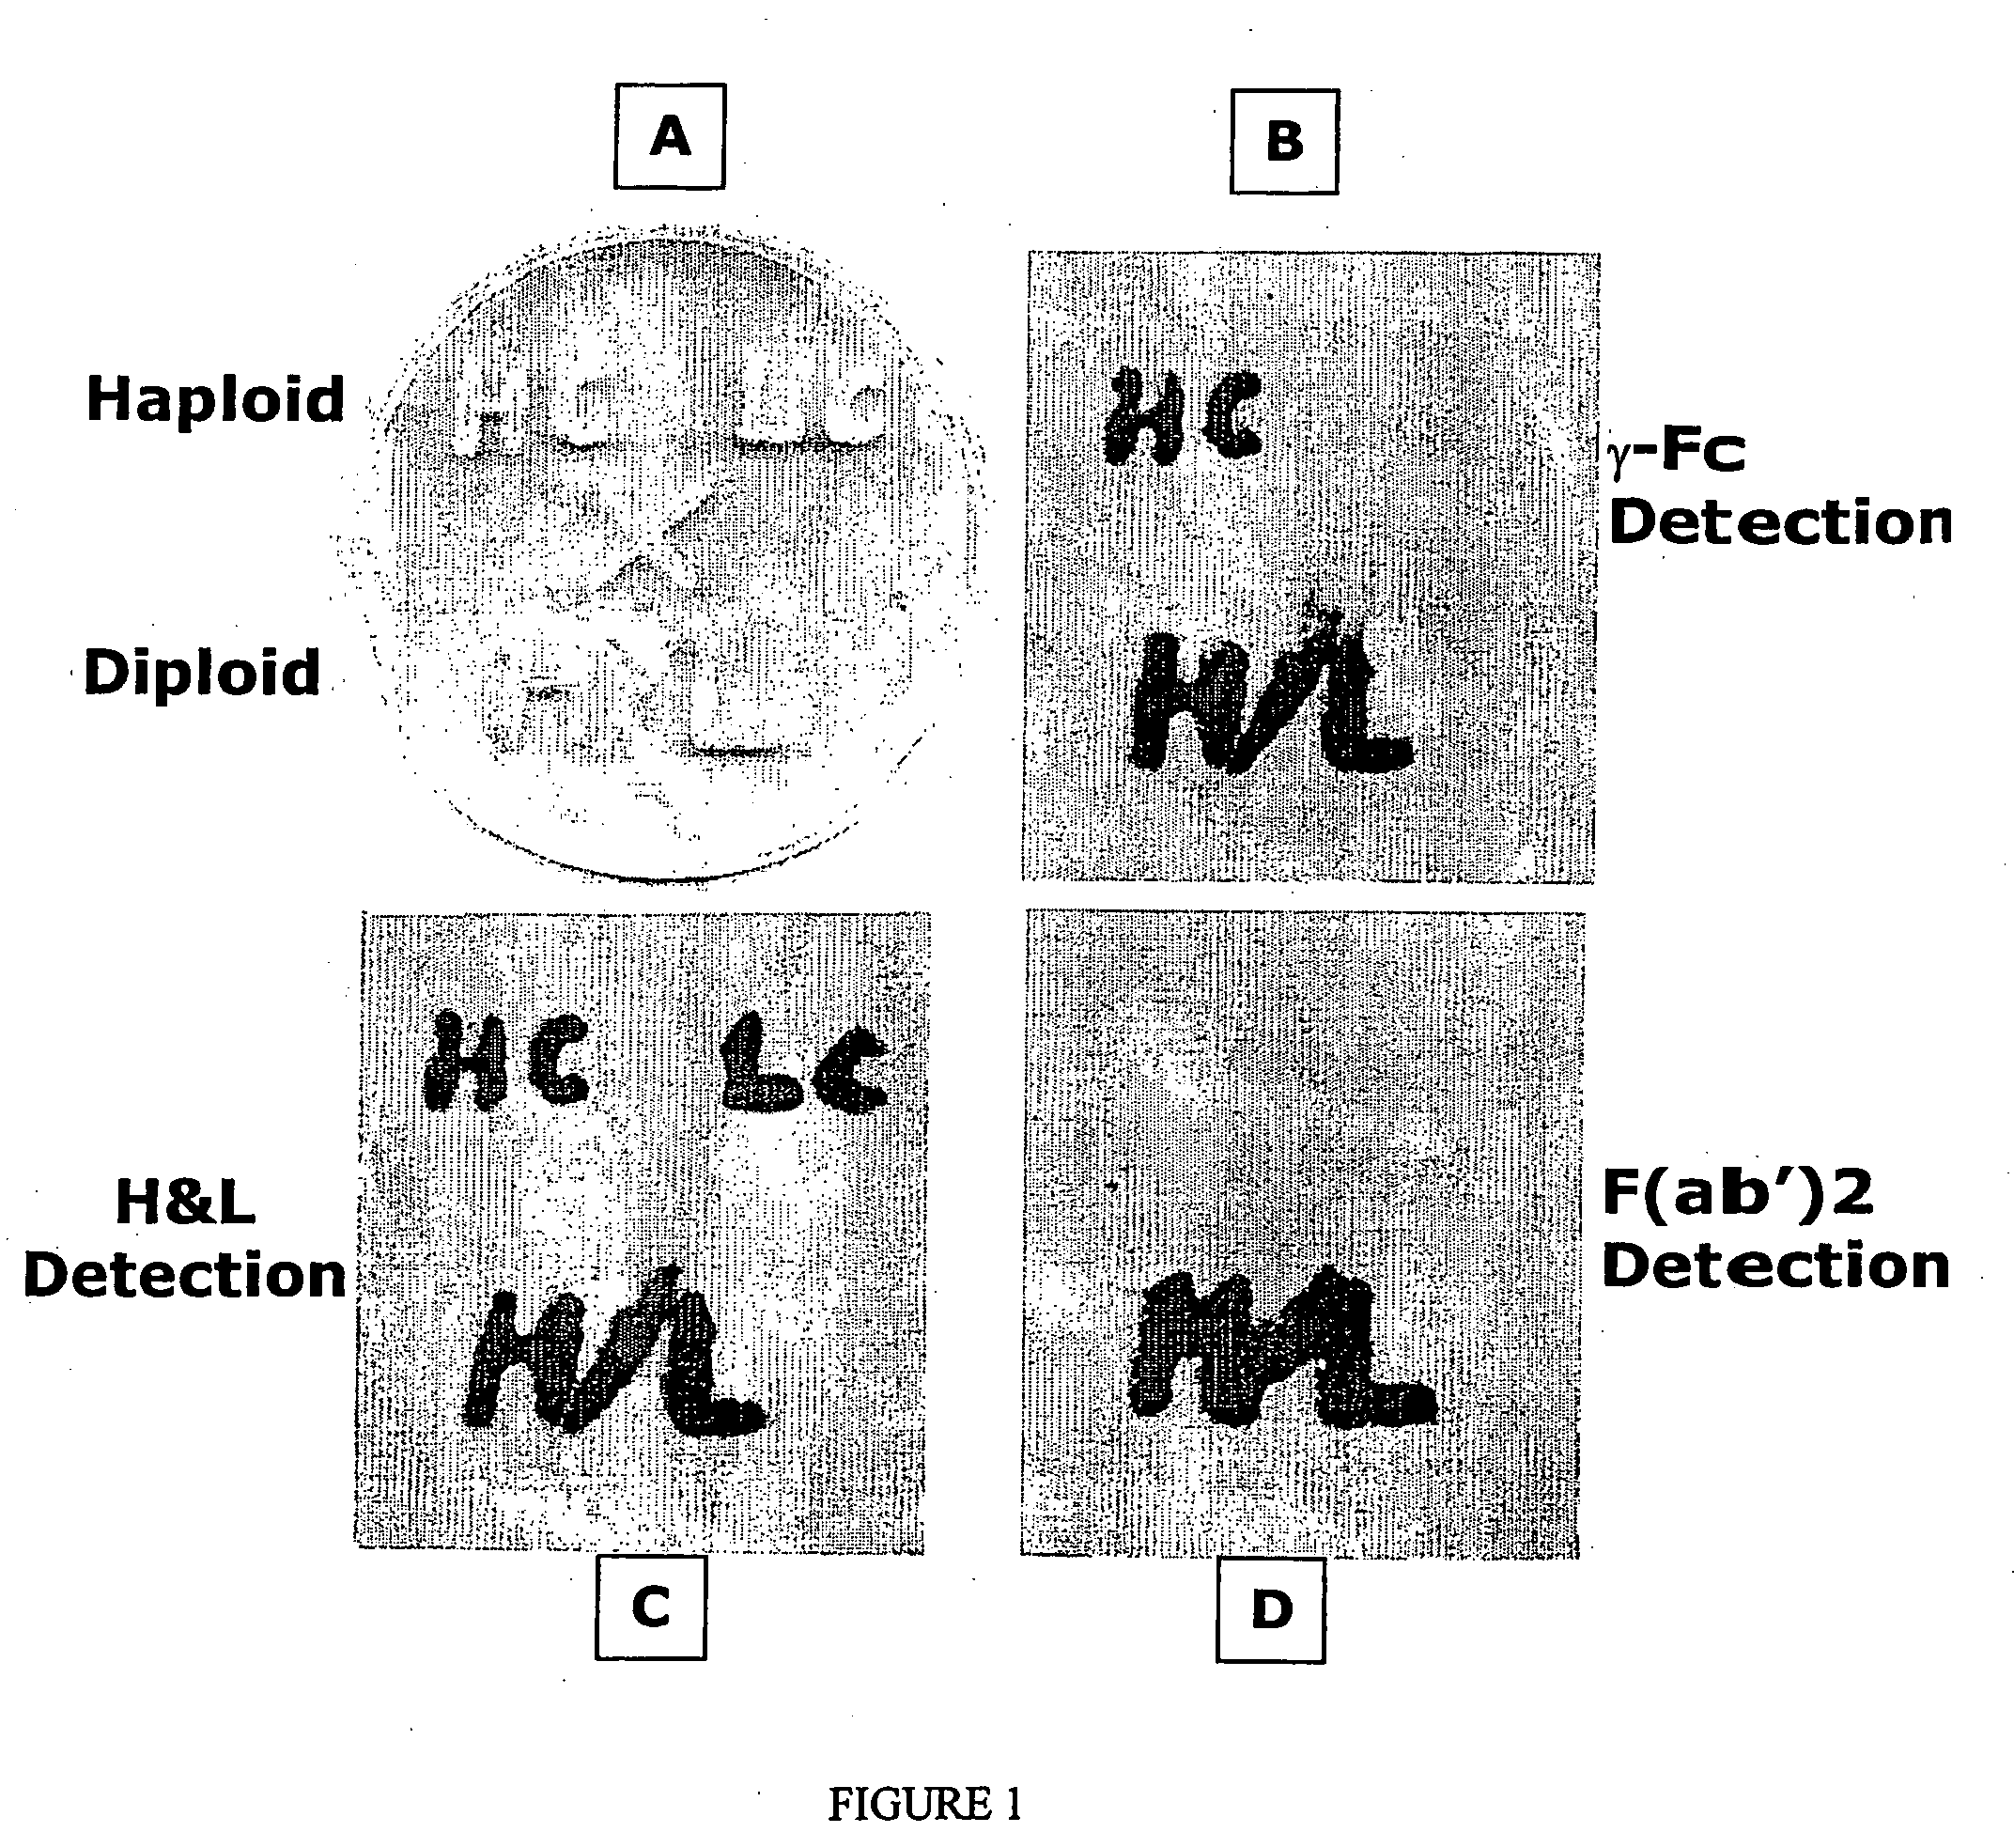 Methods of synthesizing heteromultimeric polypeptides in yeast using a haploid mating strategy